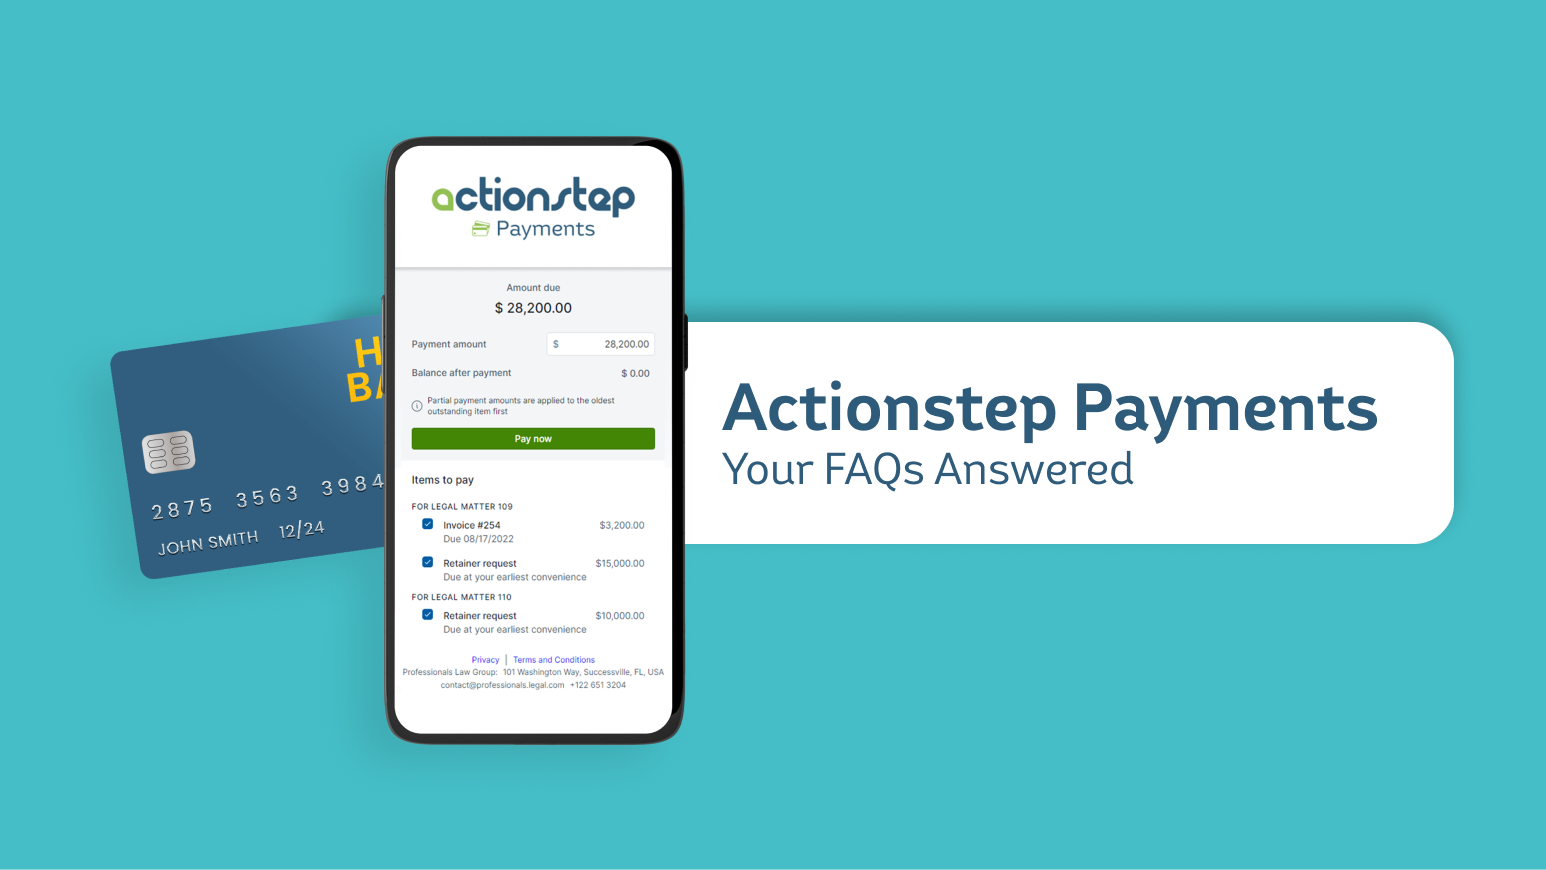 Actionstep Payments: Your FAQs Answered